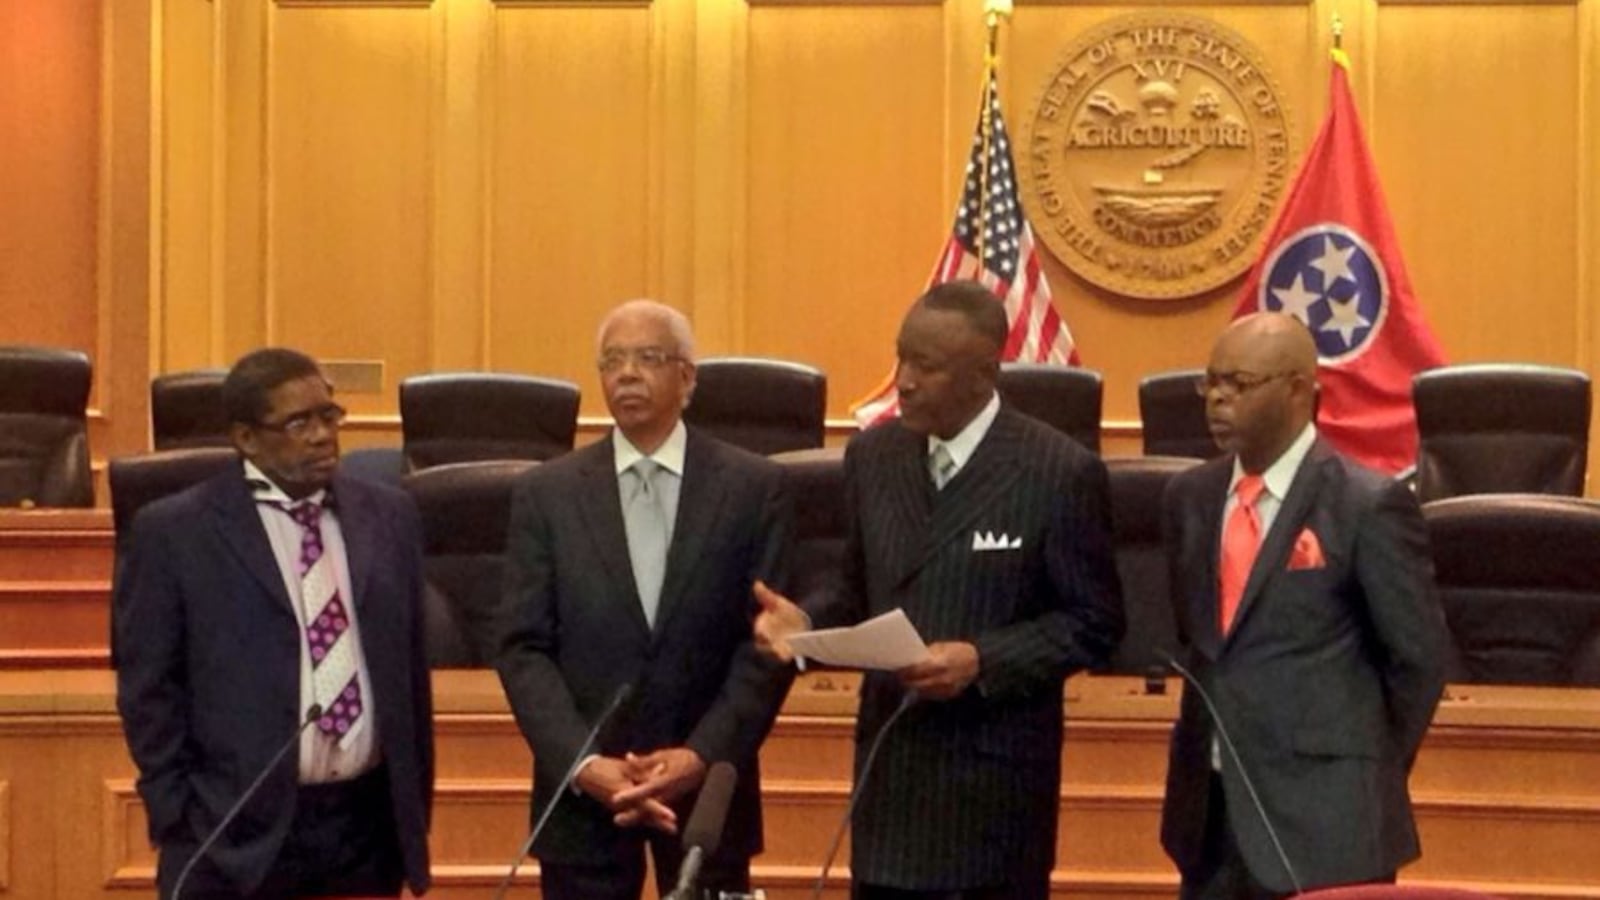 Dwight Montgomery (second from right) rallied pastors to present a petition in support of vouchers to the Tennessee legislature in 2015.